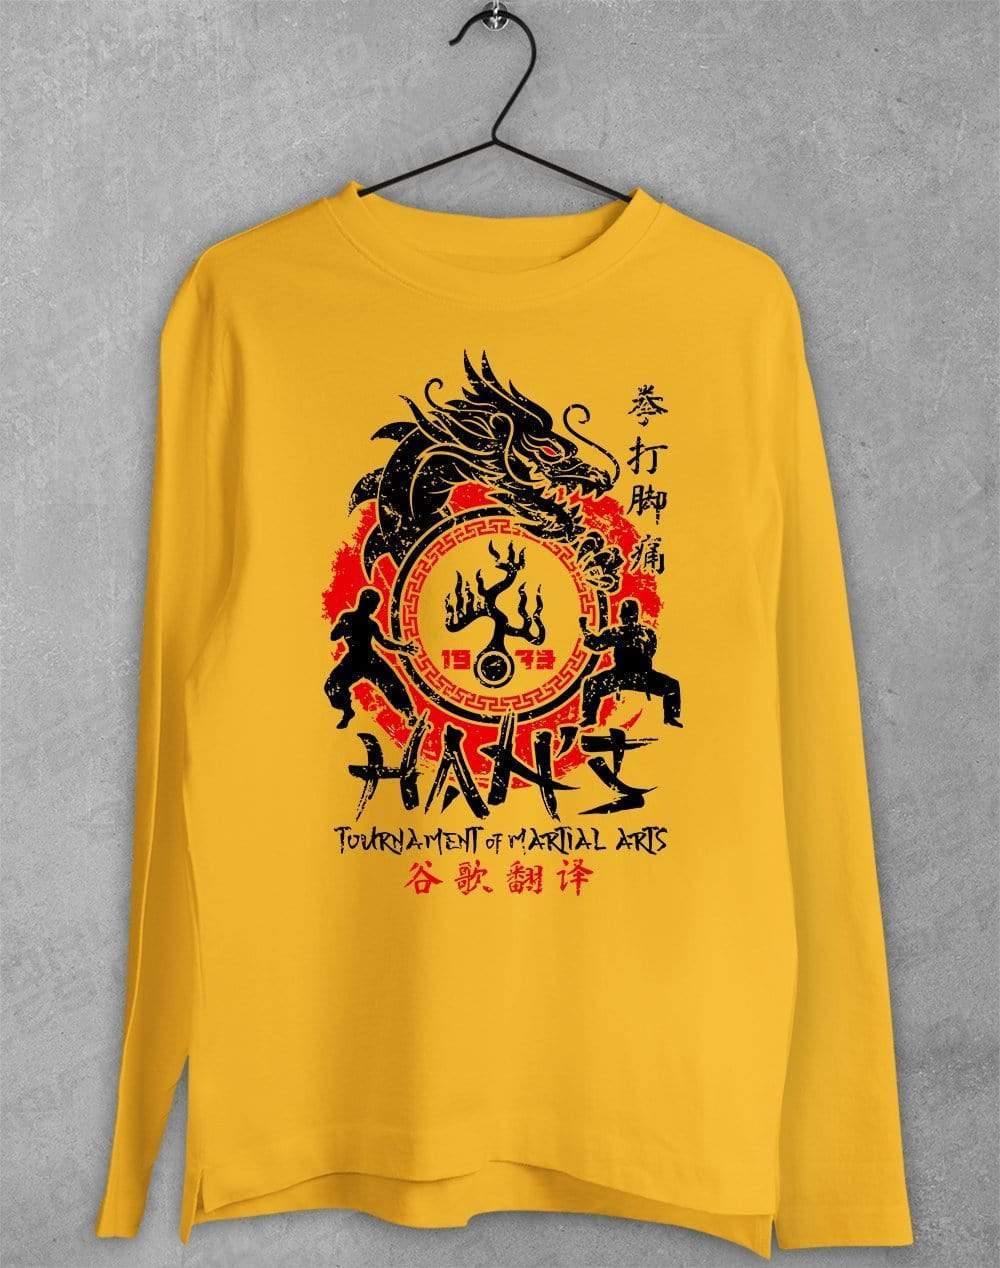 Han's Tournament of Martial Arts Long Sleeve T-Shirt S / Gold  - Off World Tees